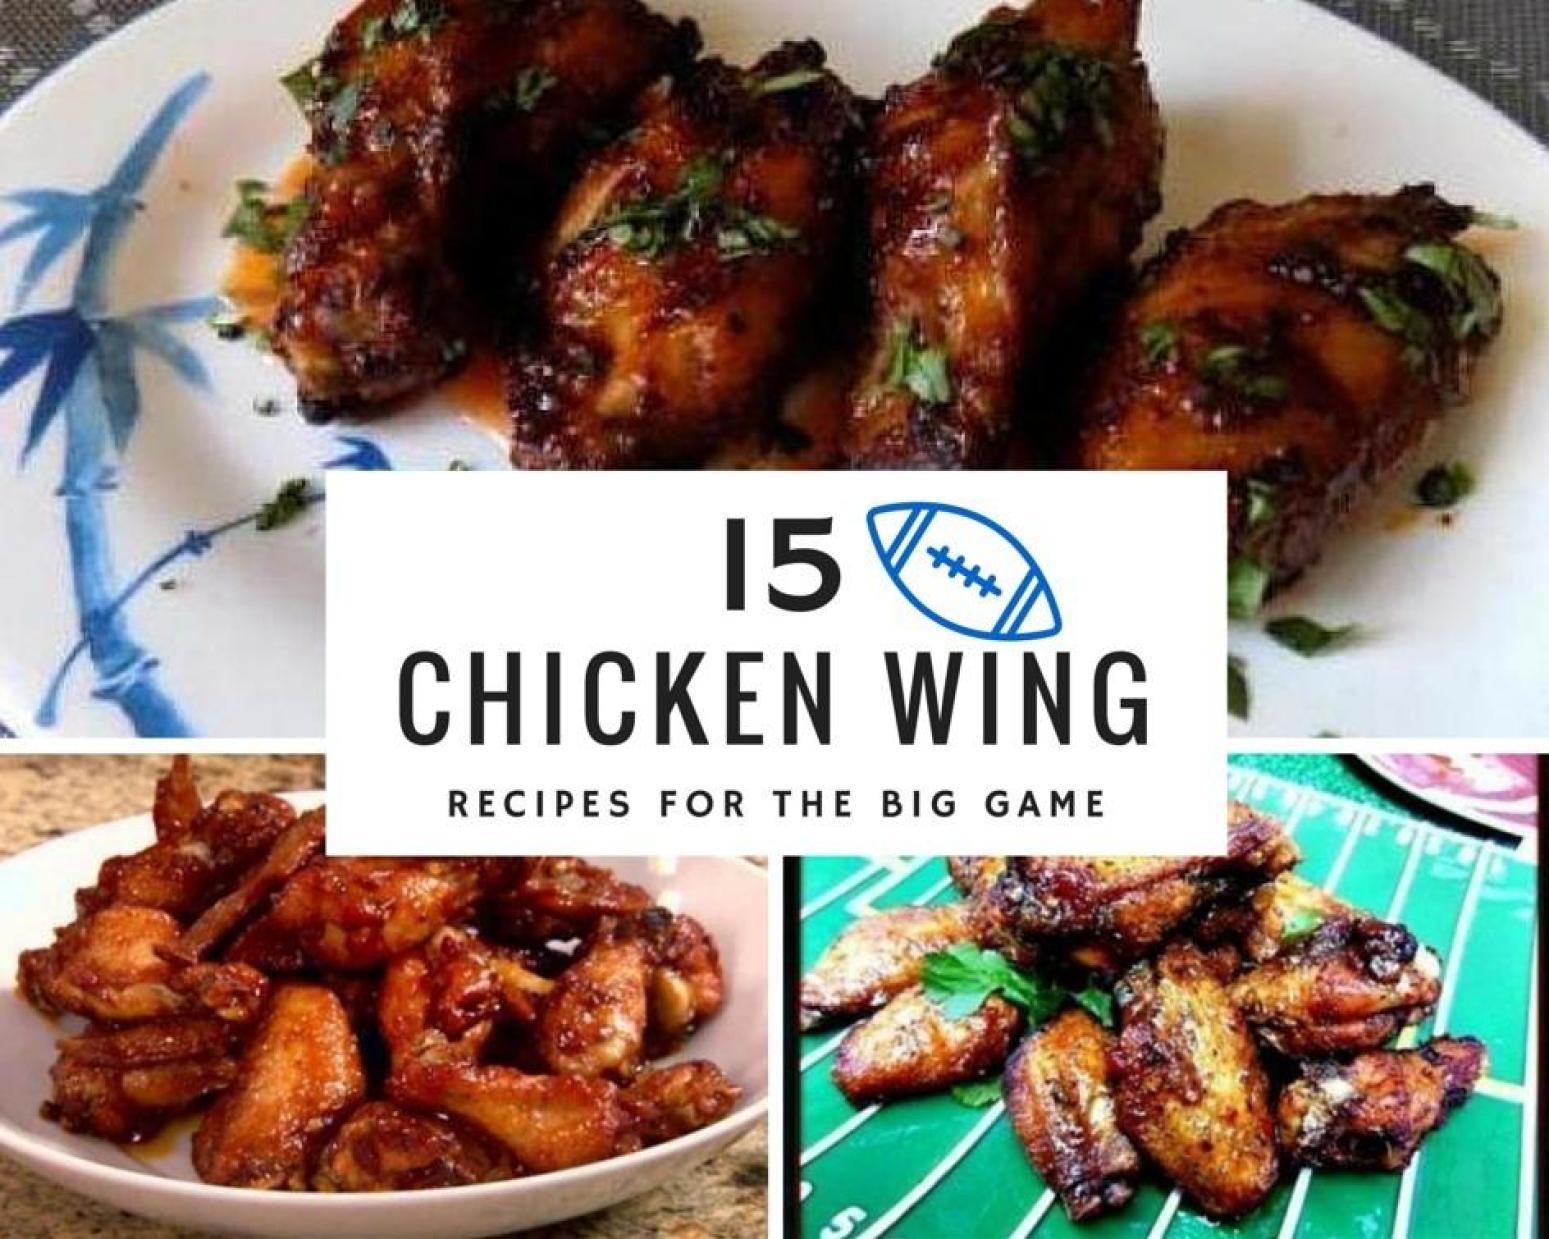 15 Wing Recipes for Big Game - A